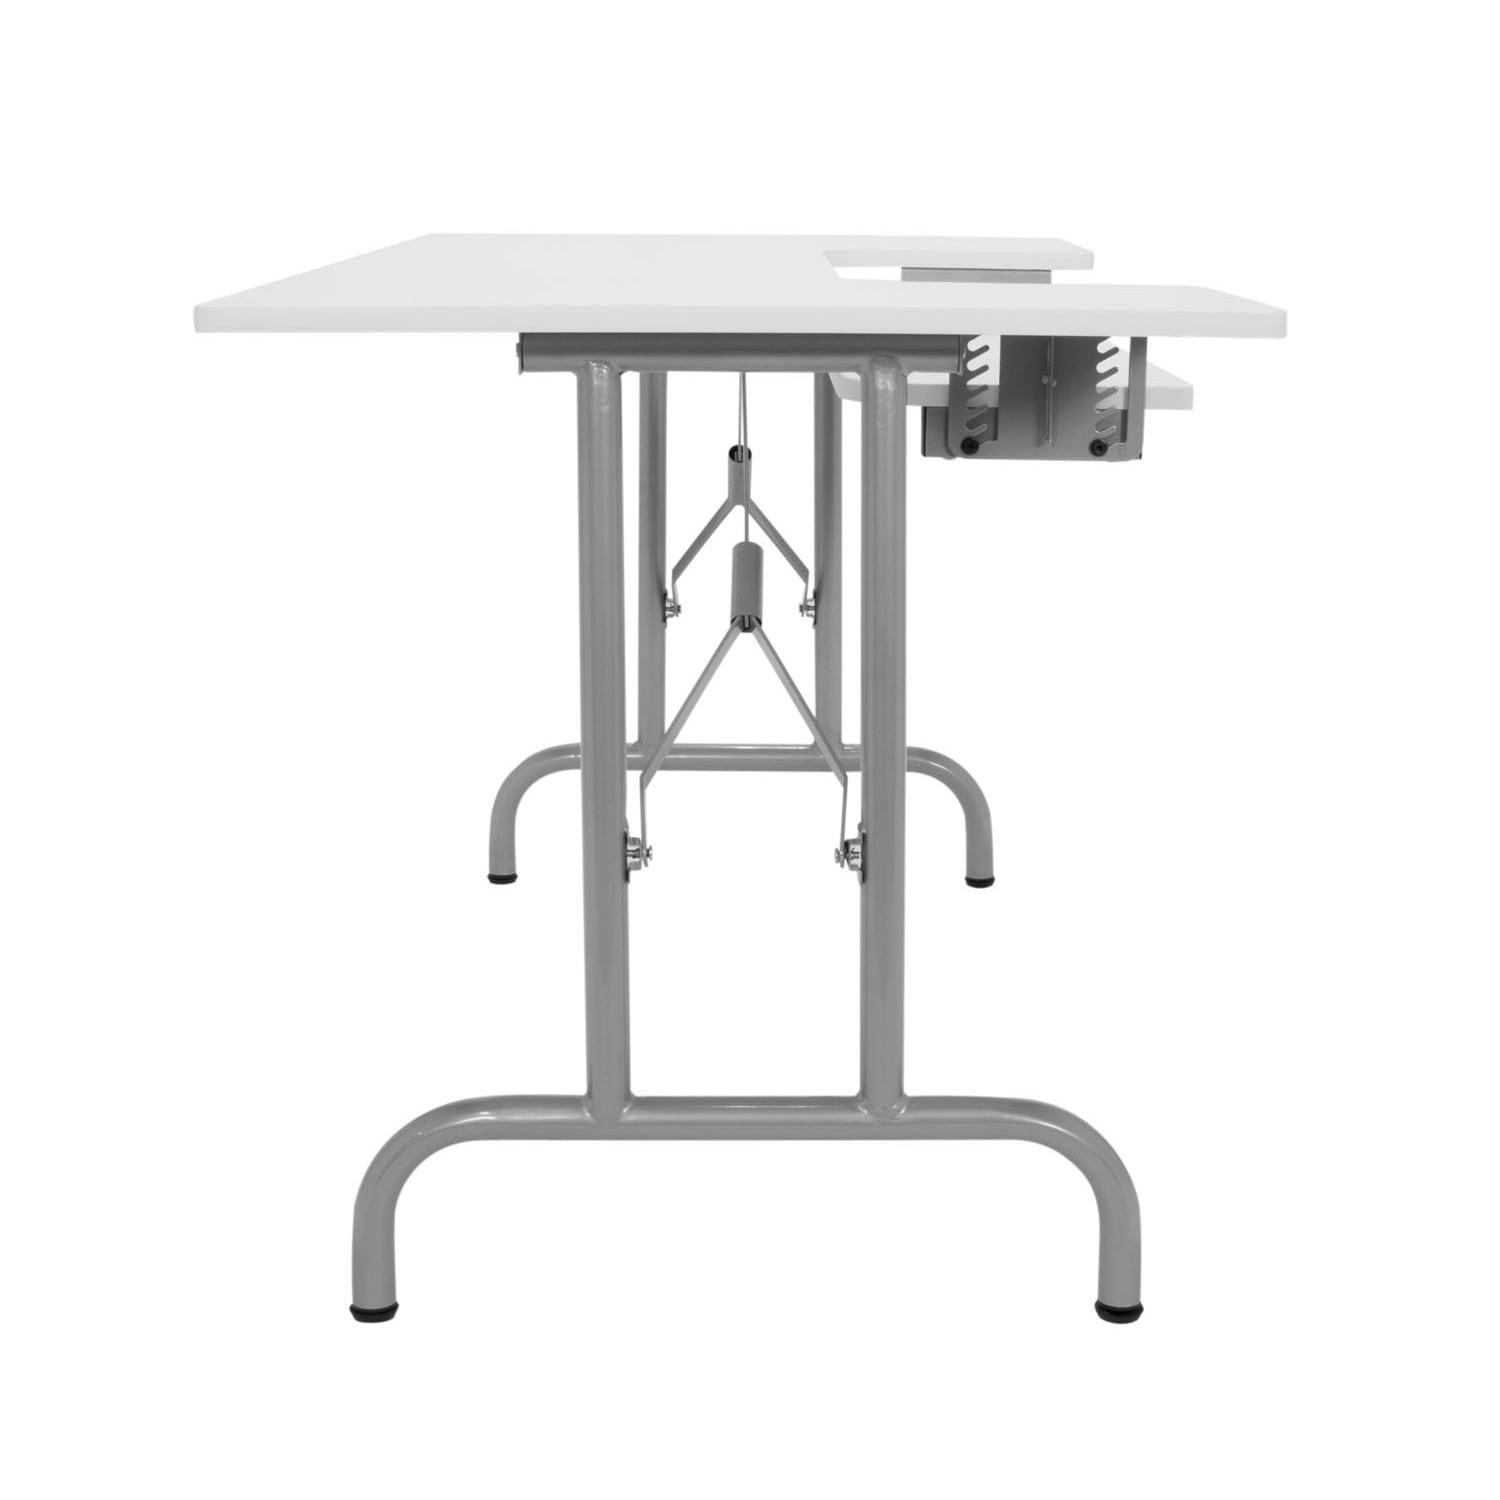 Offex Hobby Craft Center Multipurpose Foldable Sewing Desk Table - Bed Bath  & Beyond - 13446504